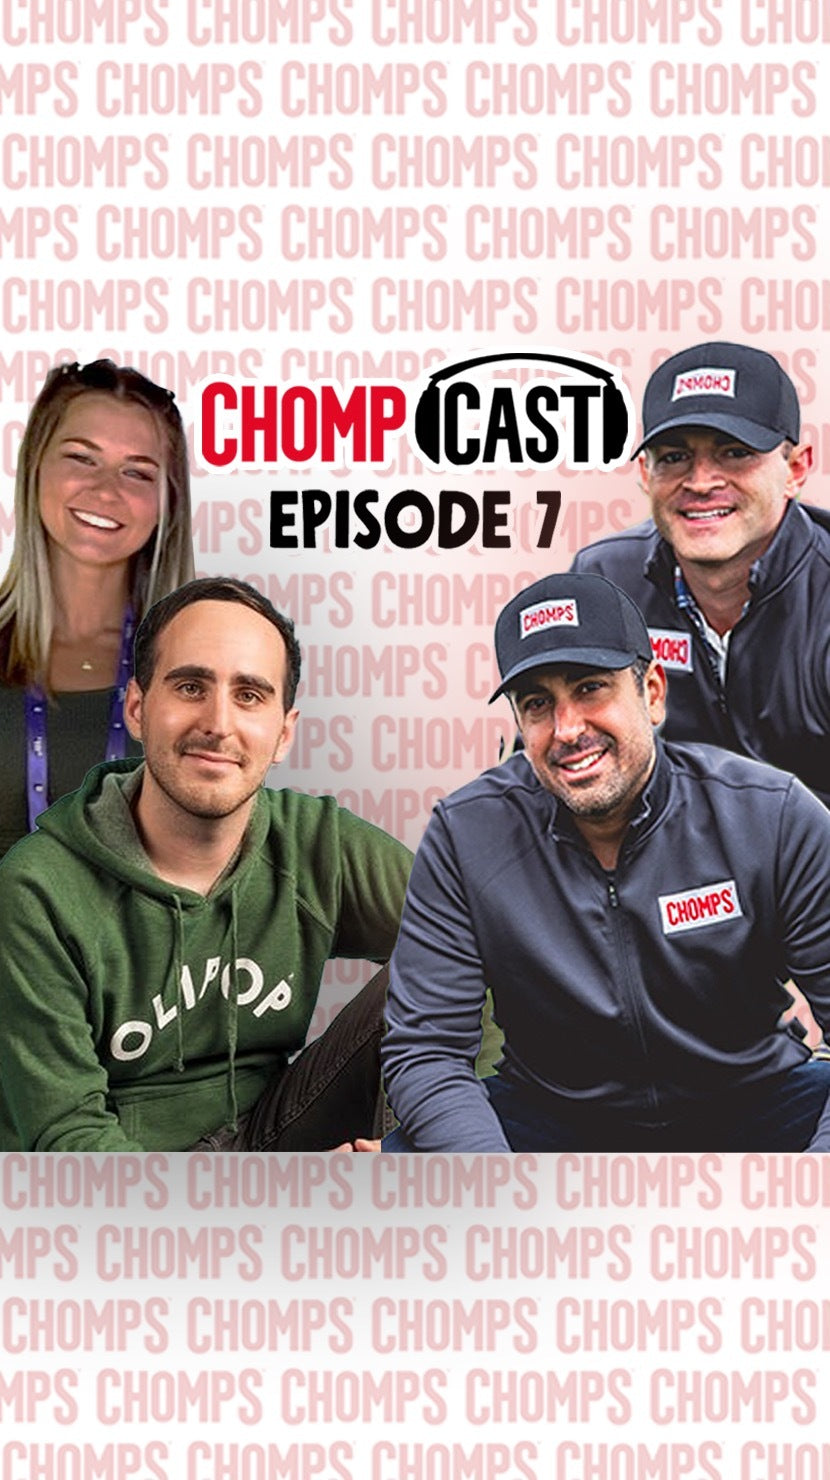 Chompcast Episode 7: Eli Weiss and Zoe Kahn on CX and Retention